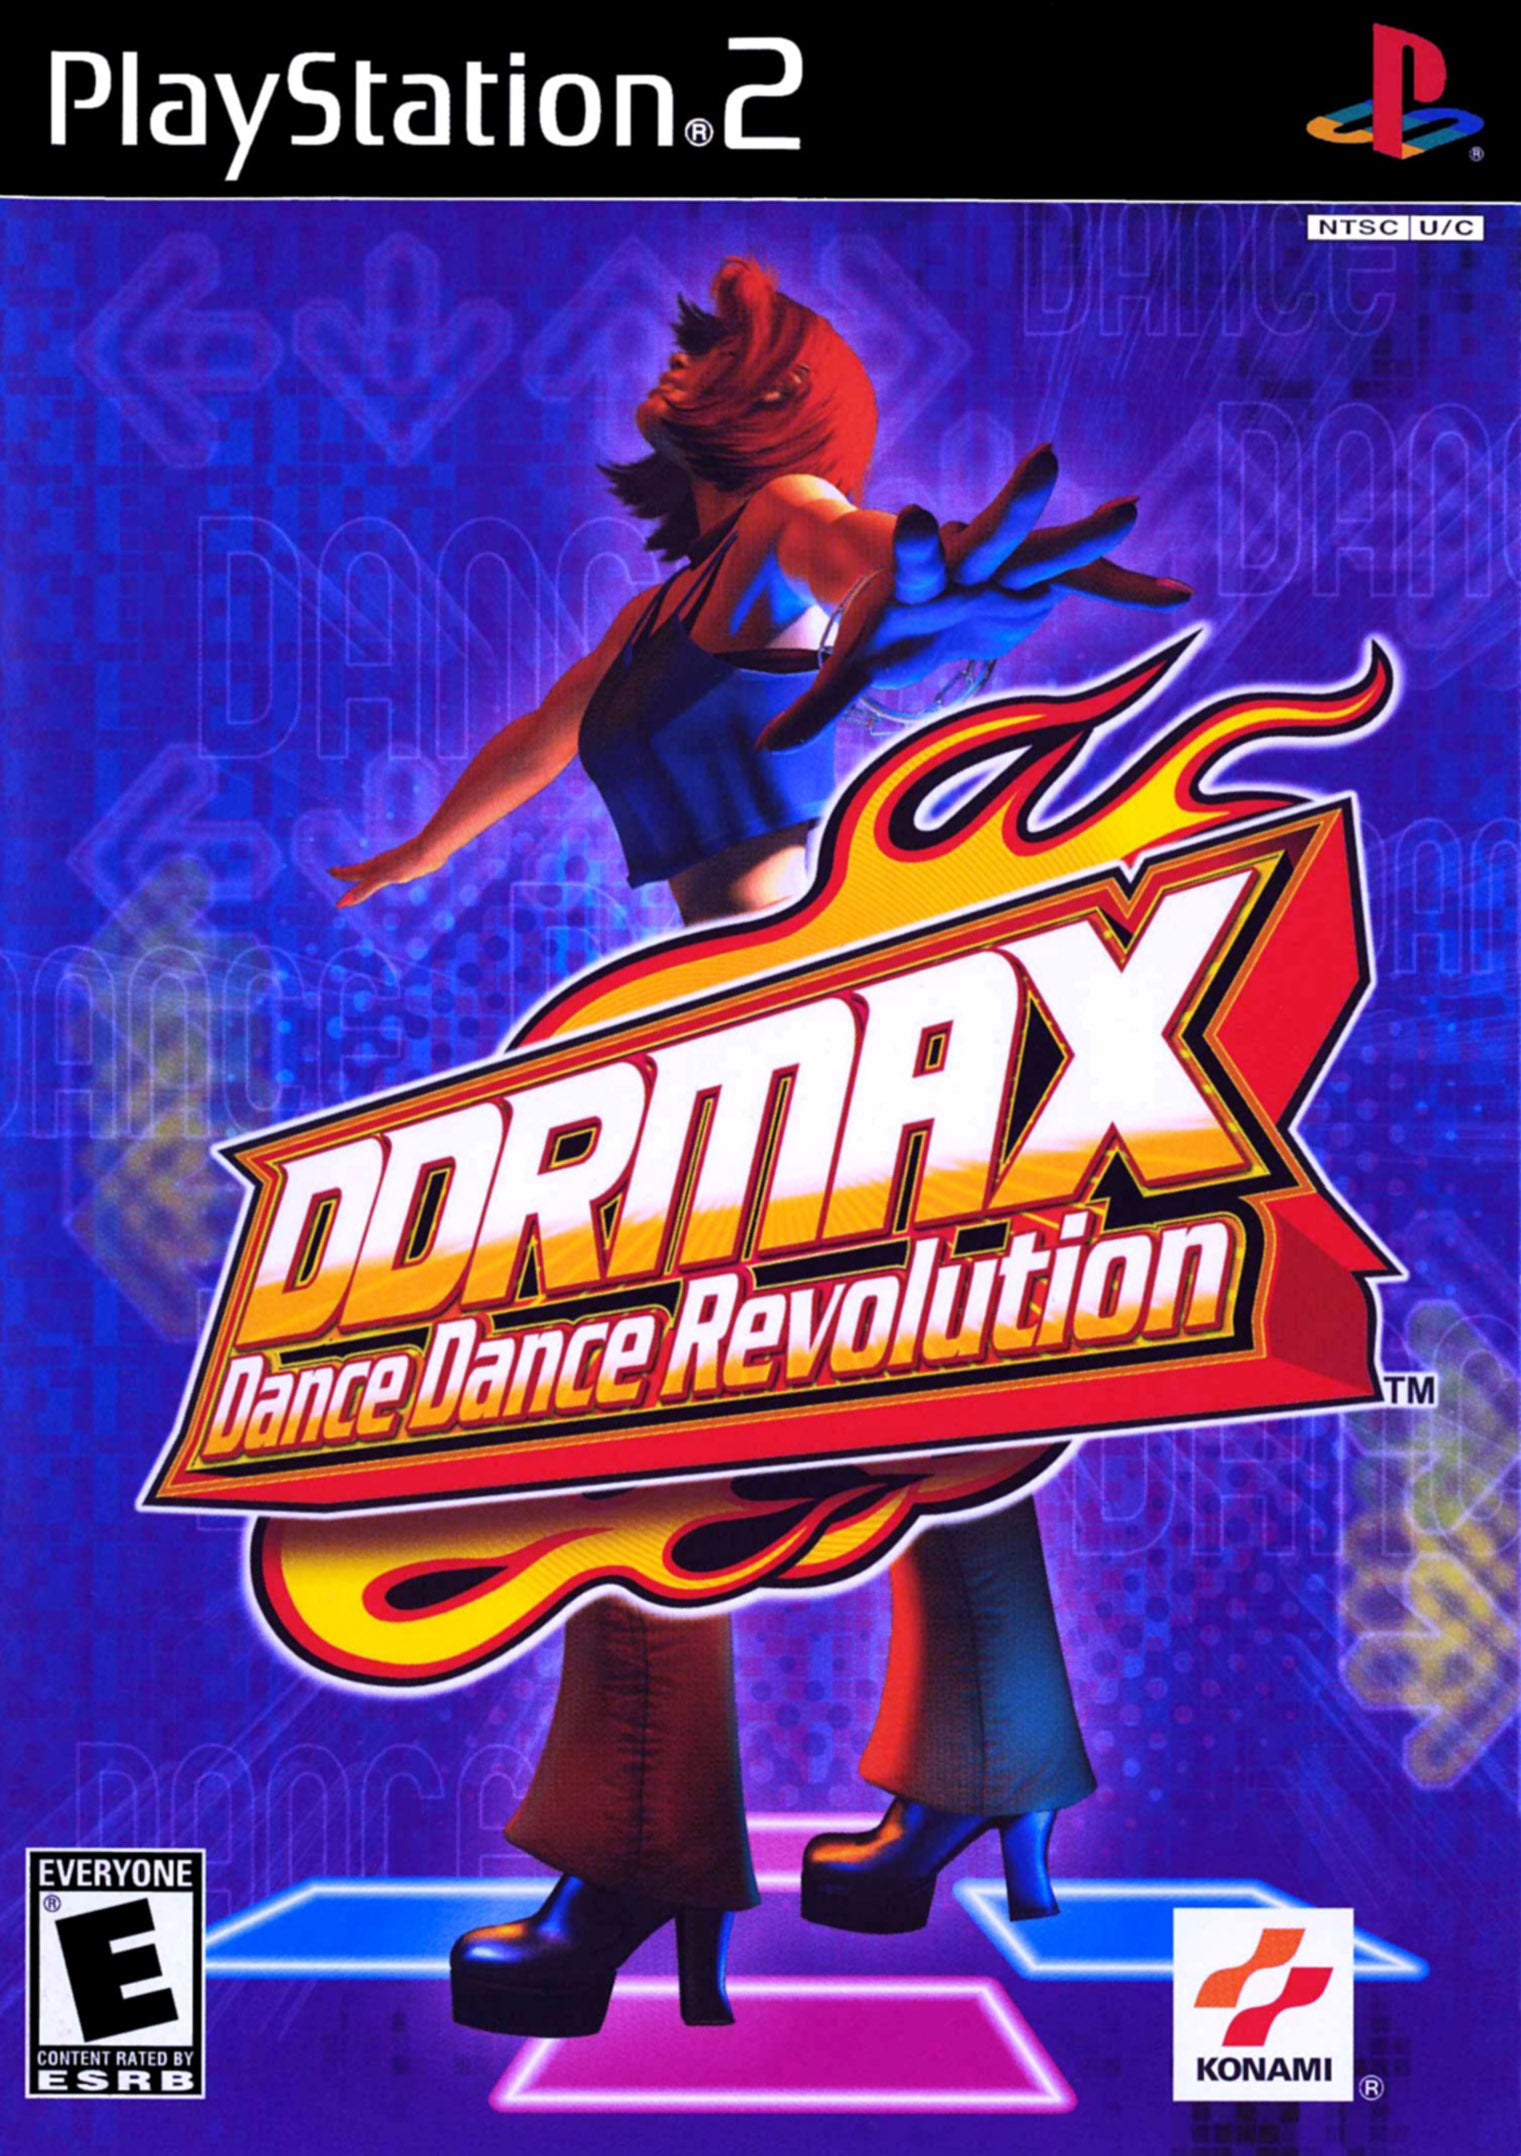 DDRMAX: Dance Dance Revolution - PlayStation 2 (PS2) Game - YourGamingShop.com - Buy, Sell, Trade Video Games Online. 120 Day Warranty. Satisfaction Guaranteed.